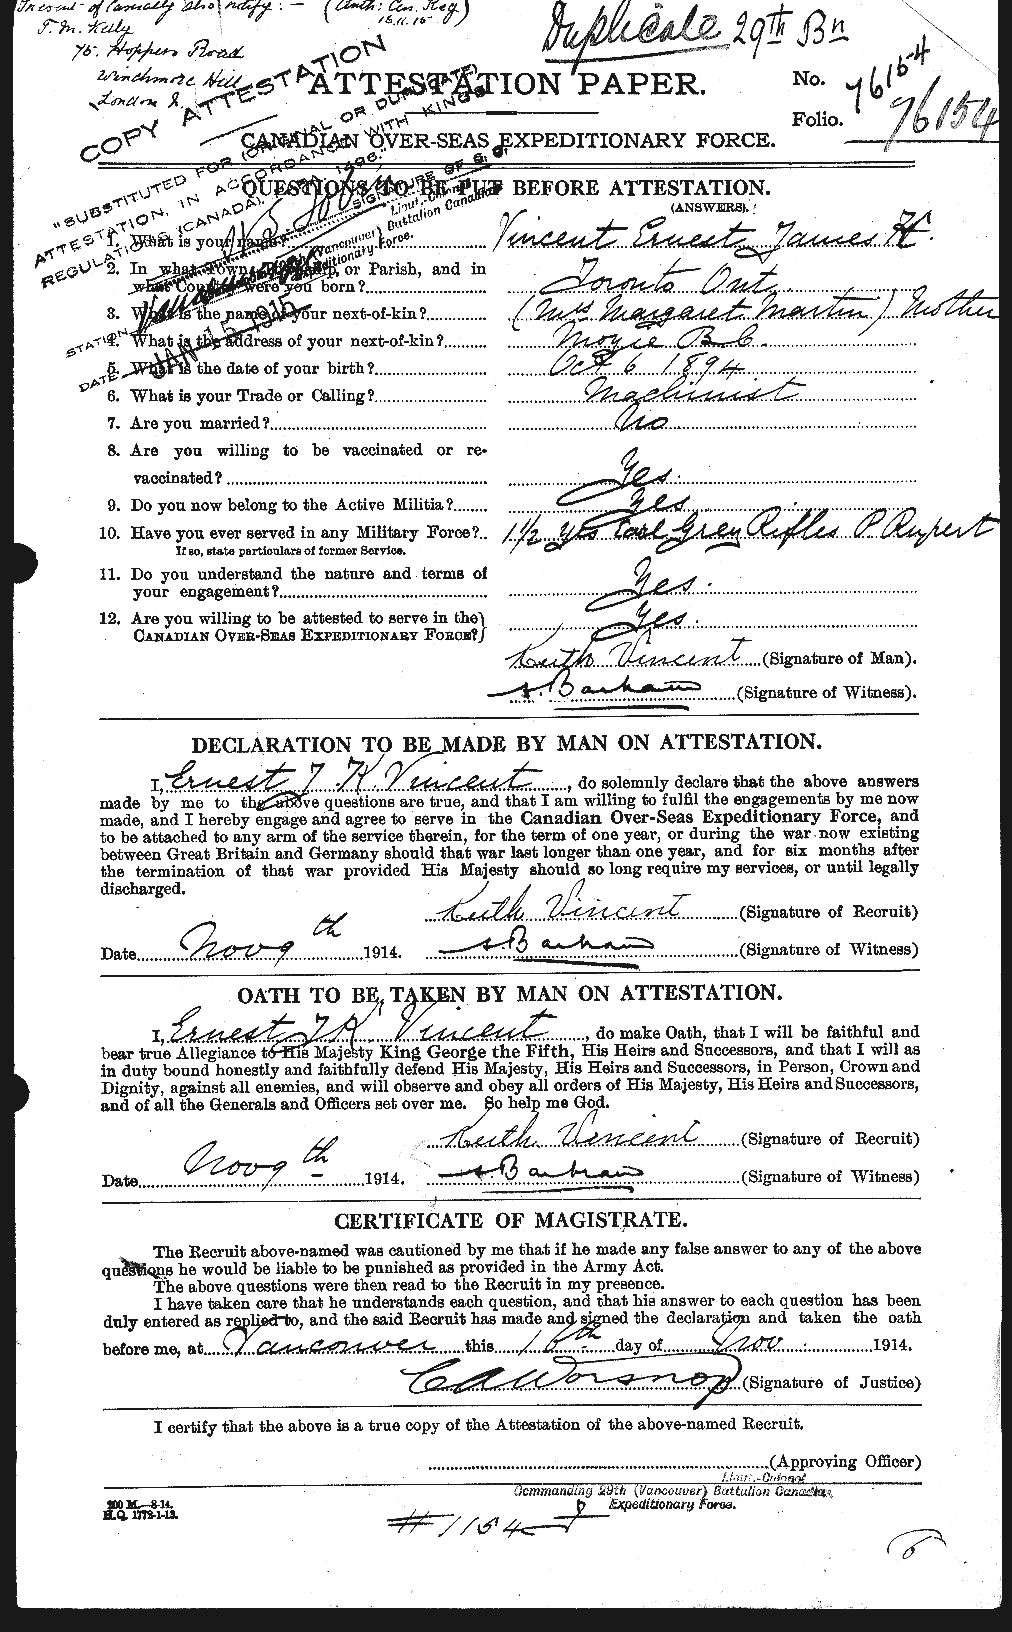 Personnel Records of the First World War - CEF 656399a